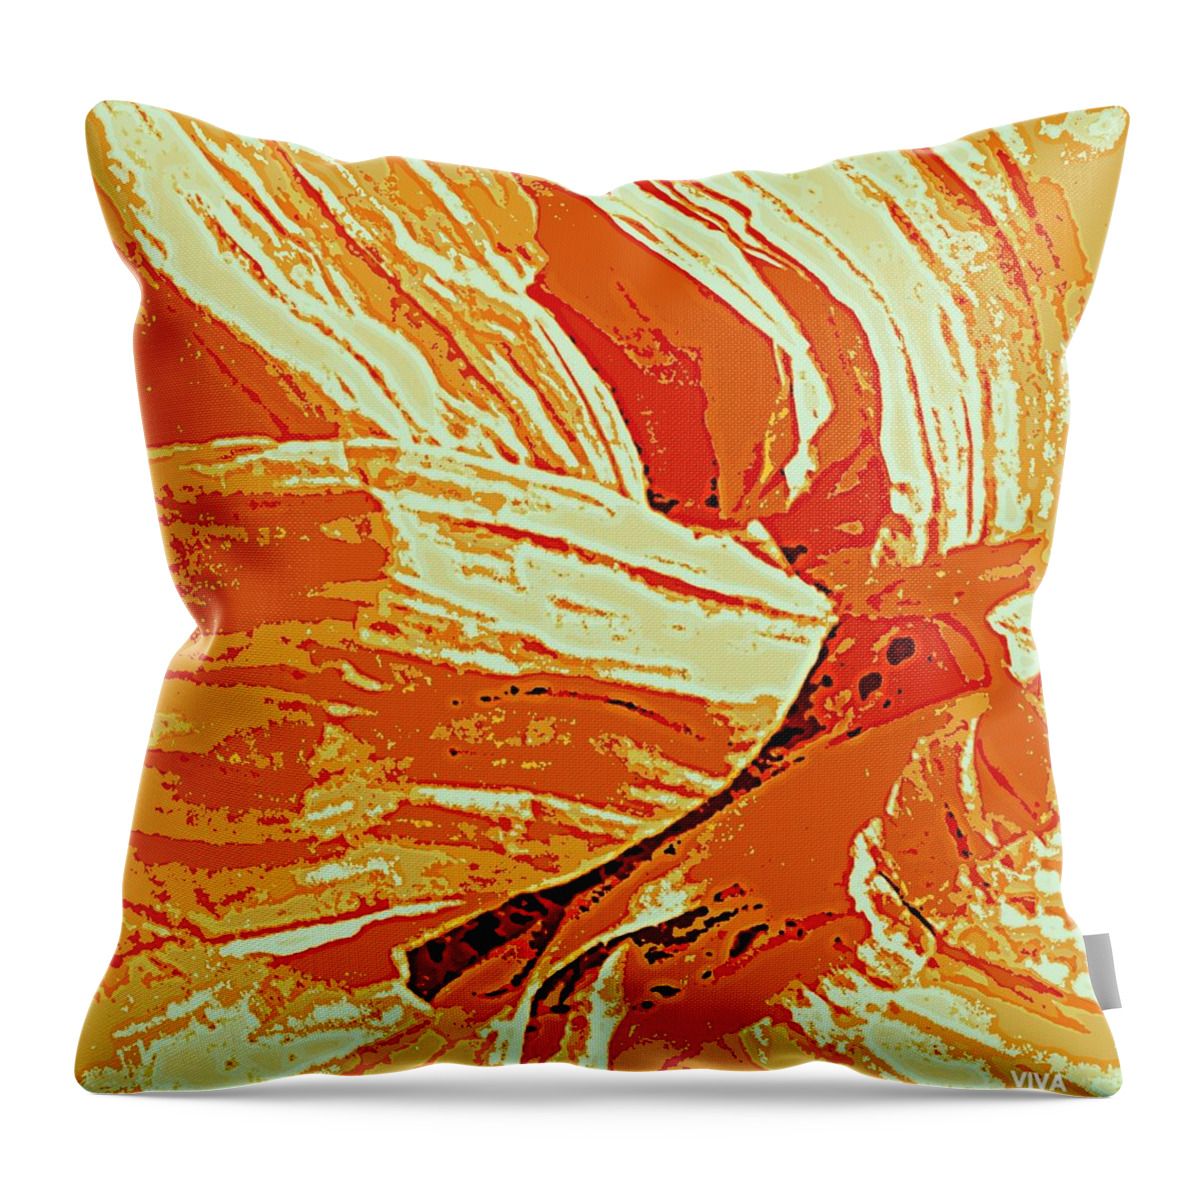 Garlic Throw Pillow featuring the photograph Garlic Folds Divine by VIVA Anderson